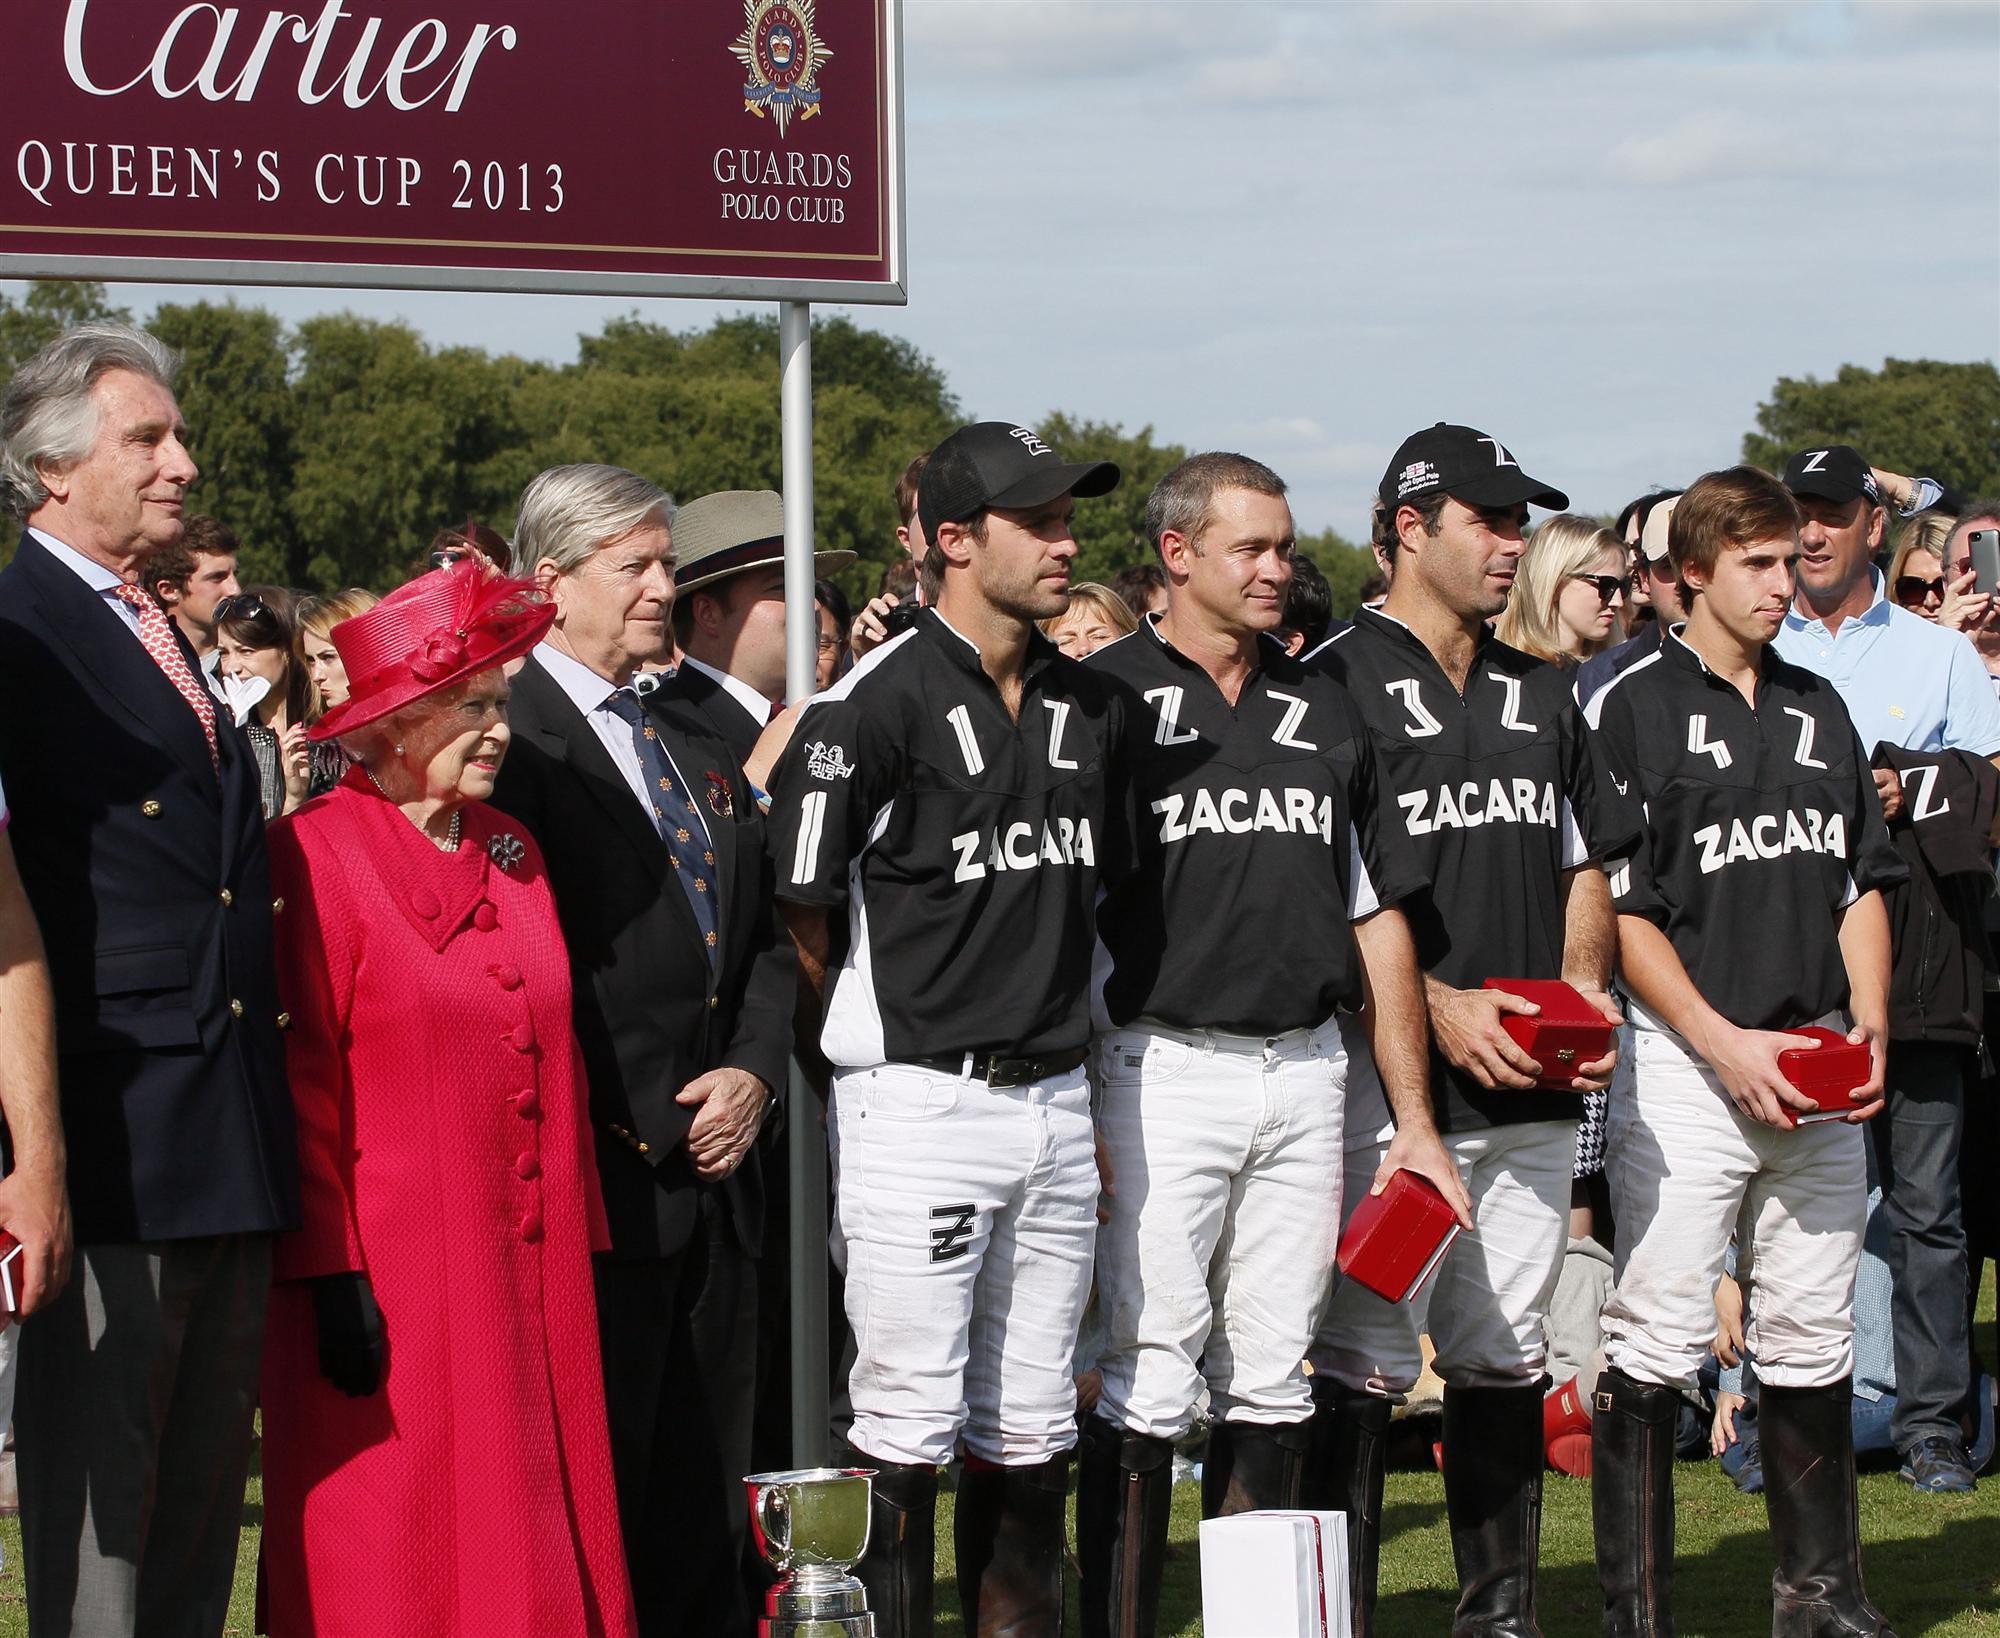 2013 Queen's Cup Final Guards Polo Club